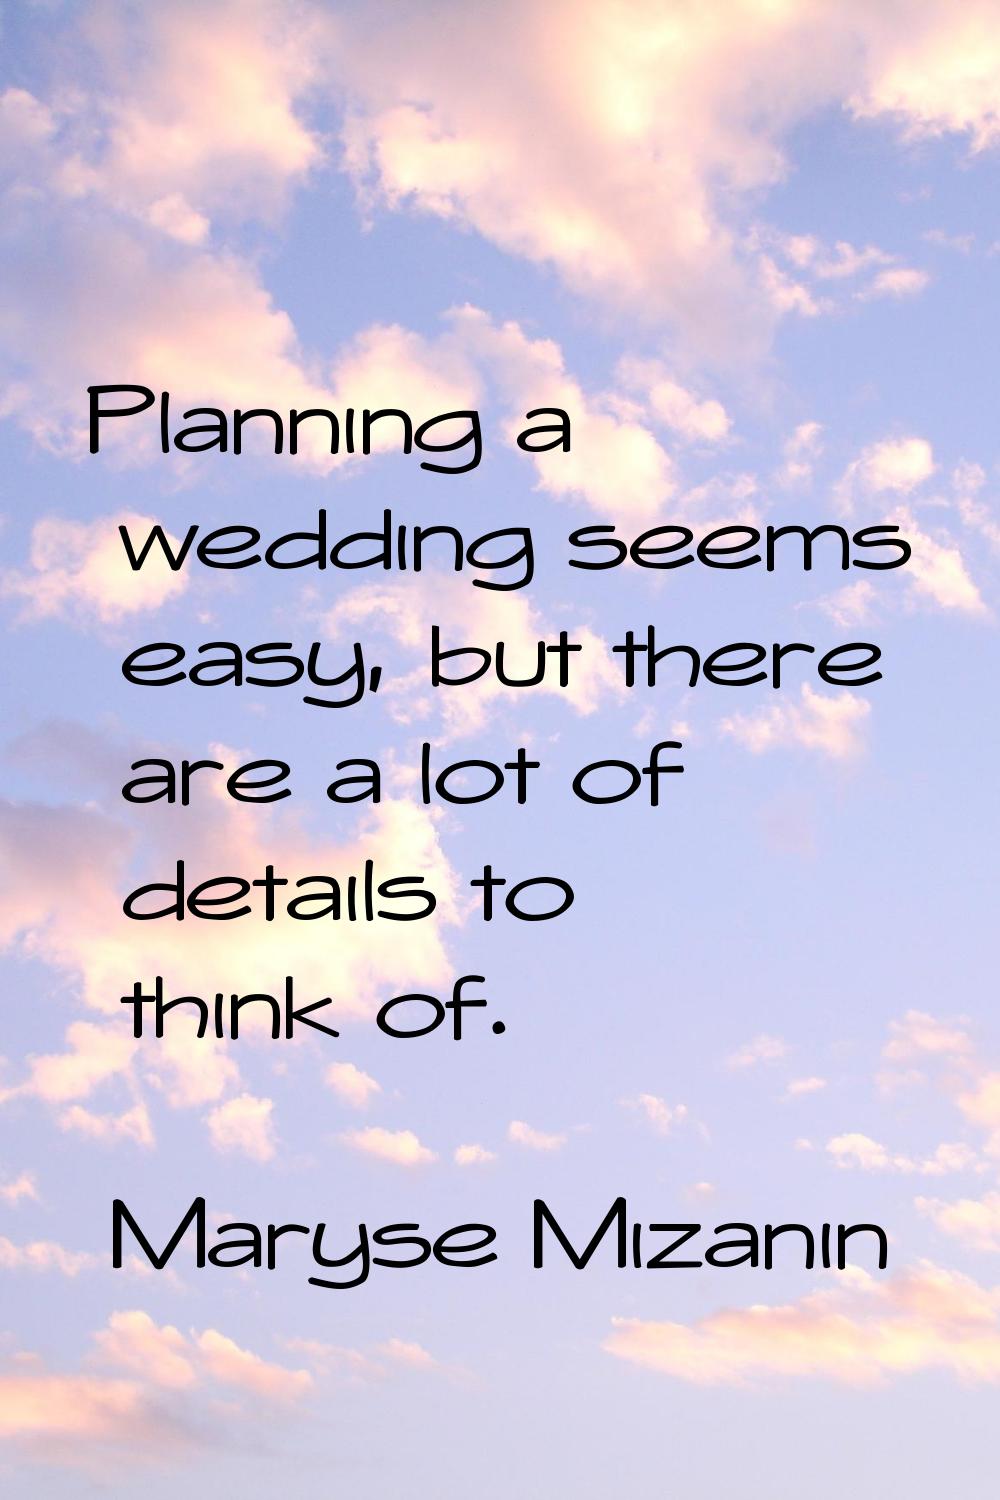 Planning a wedding seems easy, but there are a lot of details to think of.